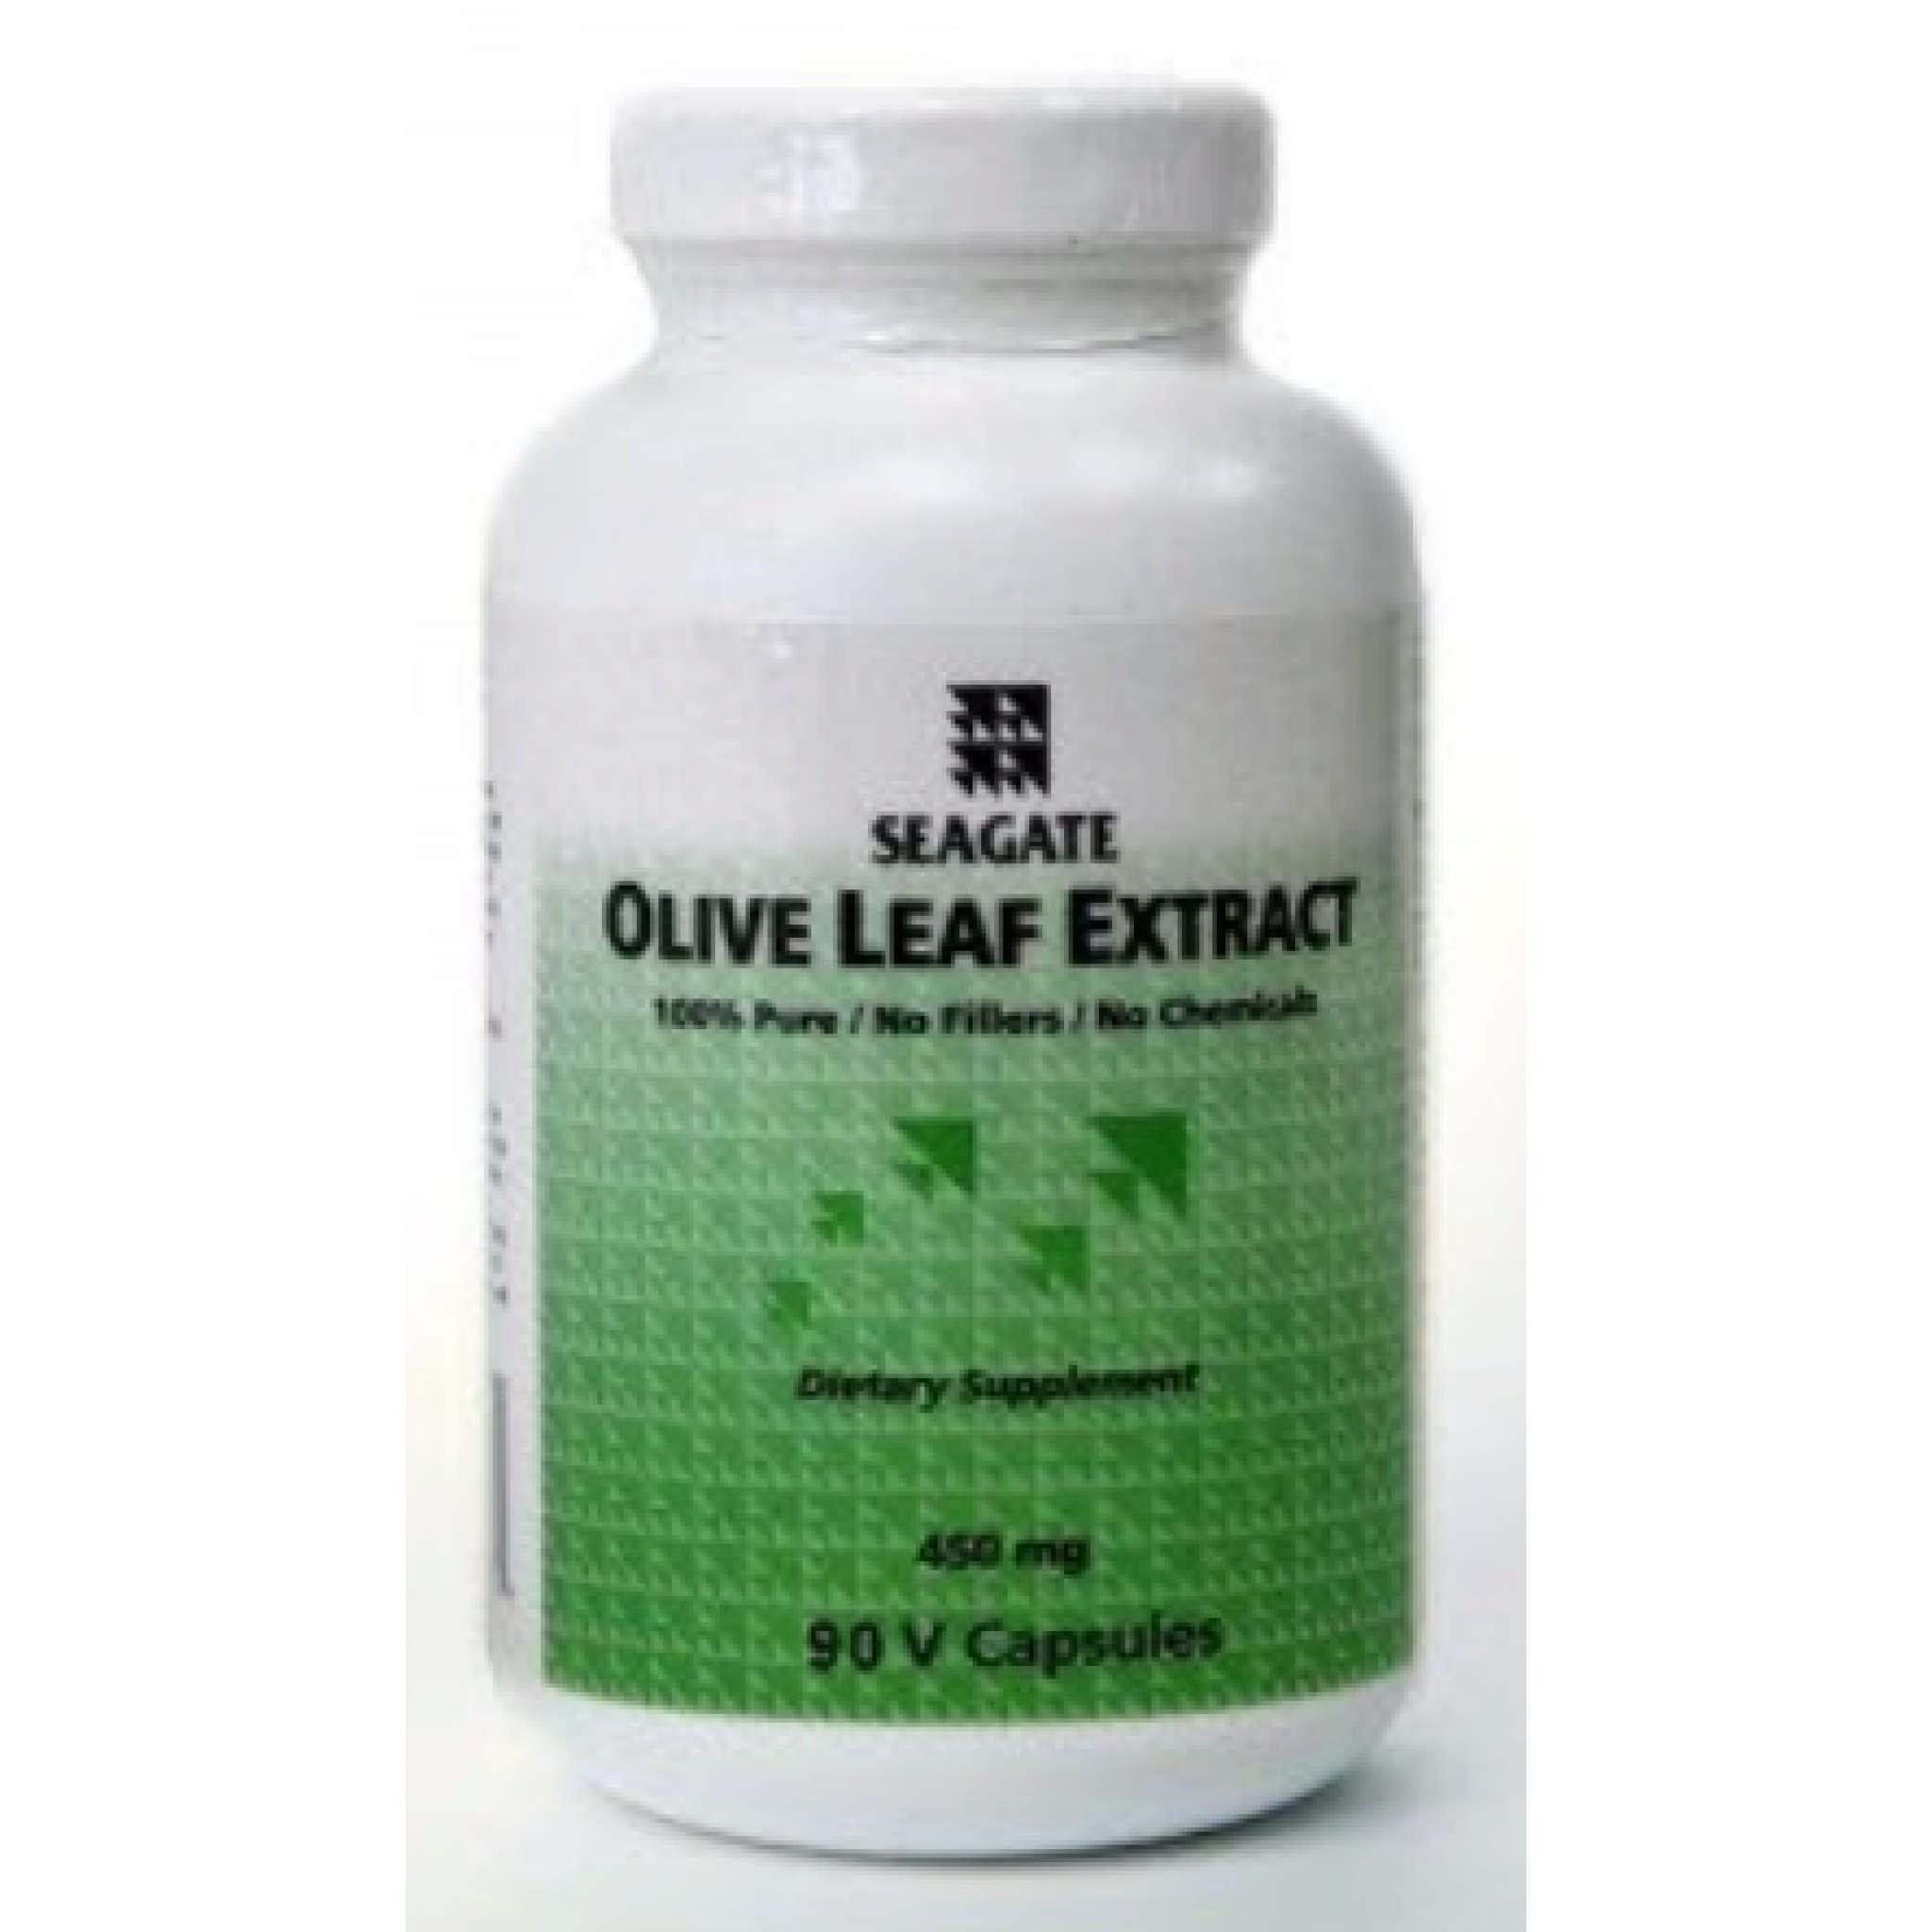 Seagate - Olive Leaf Extract 450 mg